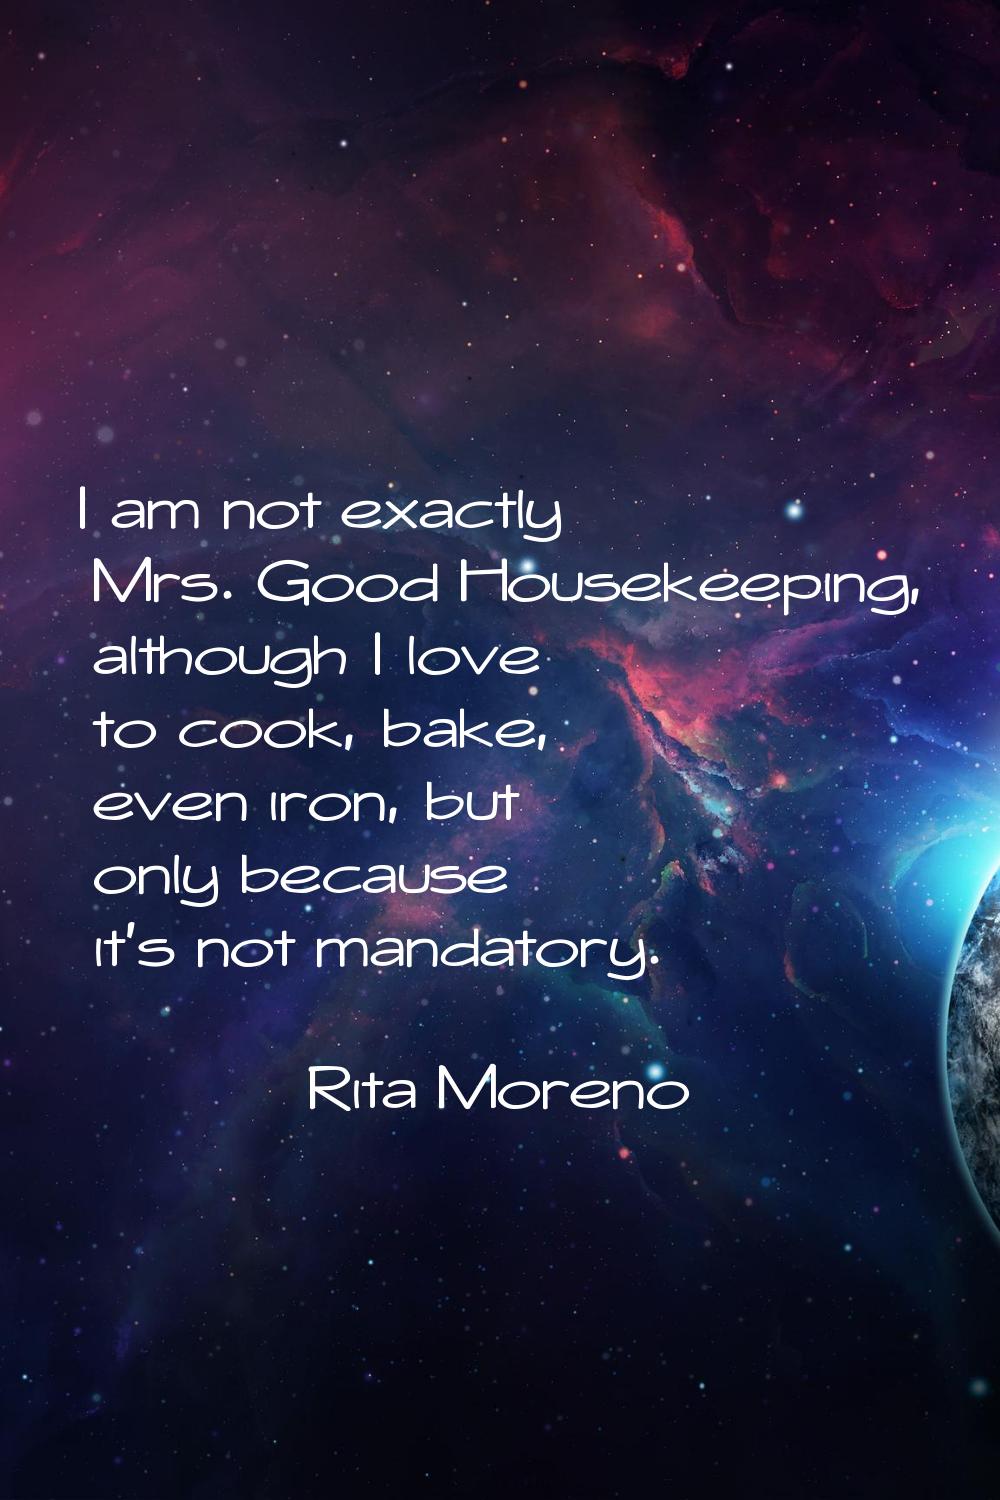 I am not exactly Mrs. Good Housekeeping, although I love to cook, bake, even iron, but only because